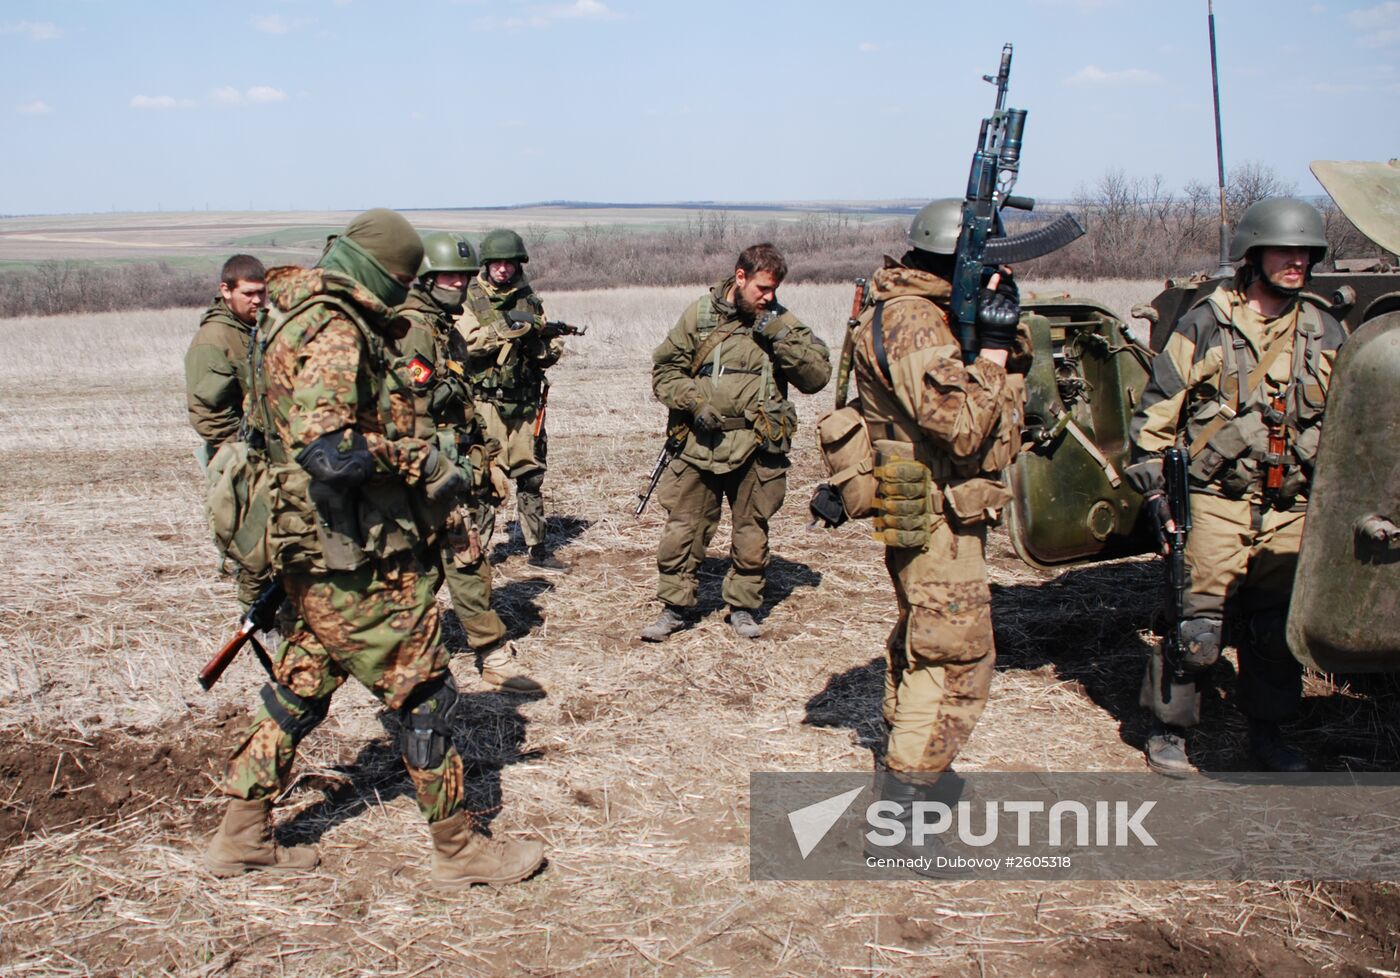 Donetsk People's Republic self-defense forces hold drills